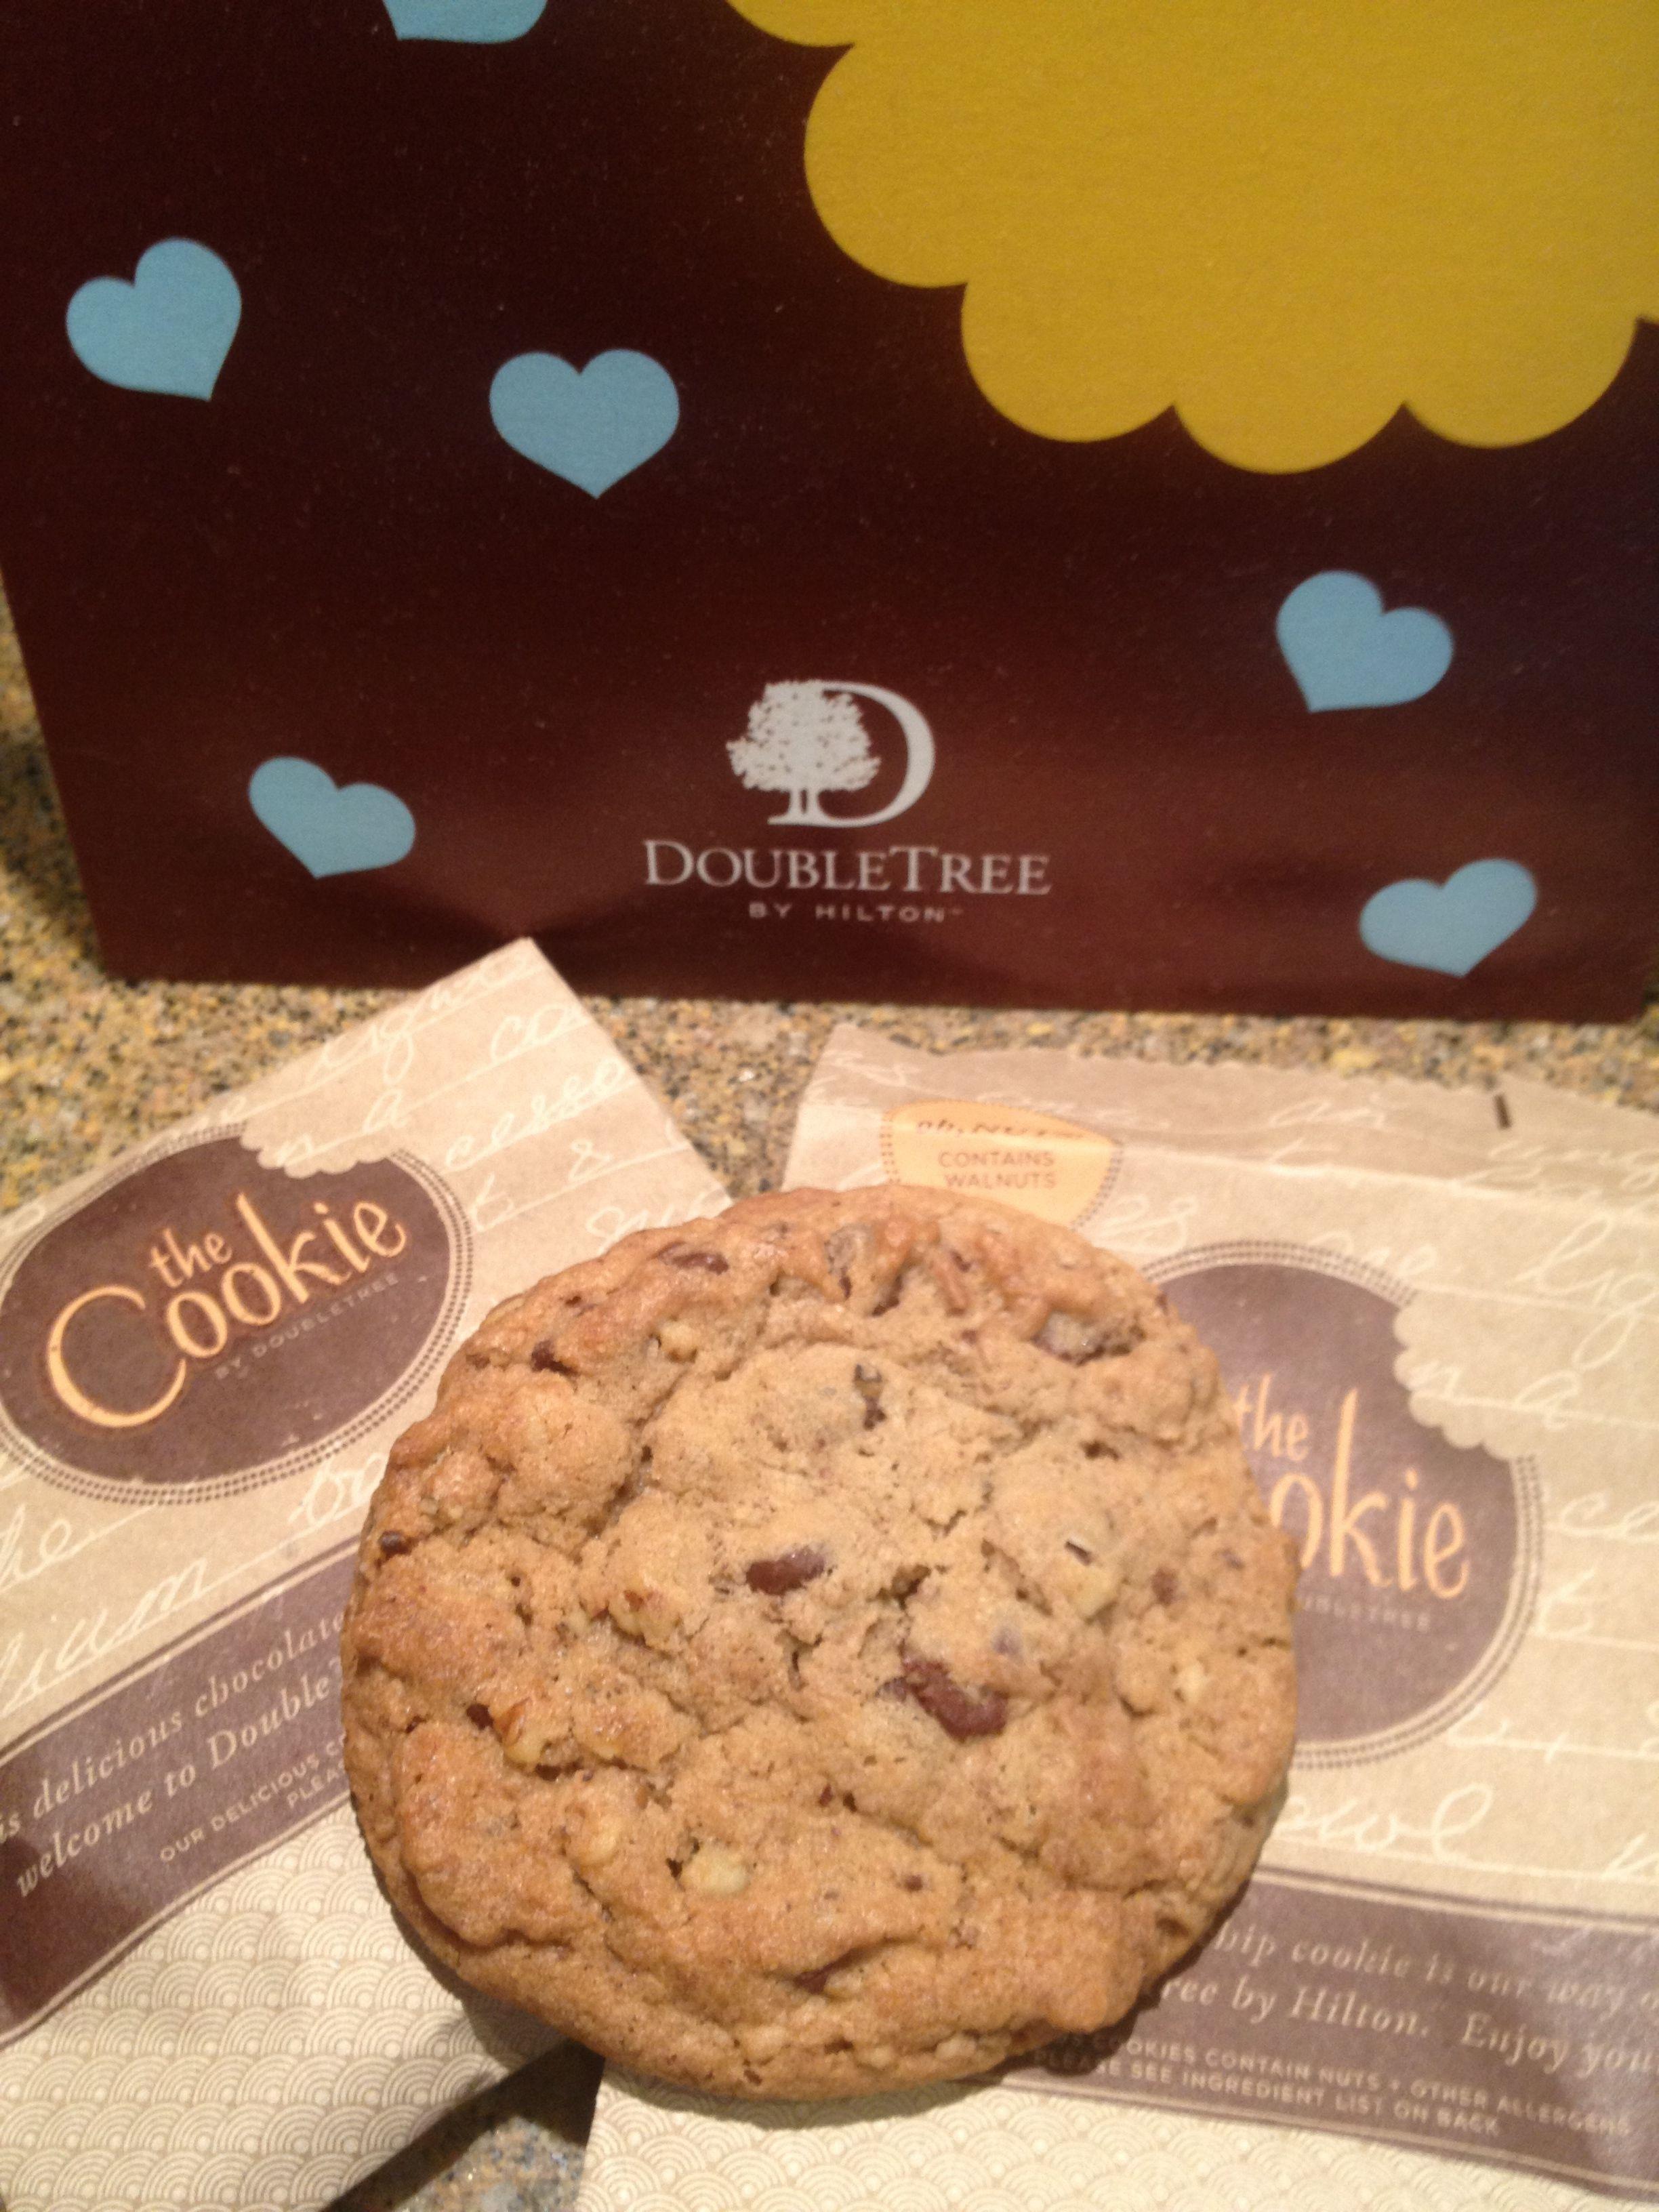 DoubleTree Cookie Logo - The Secret To Getting Free DoubleTree Cookies Miles & Martinis